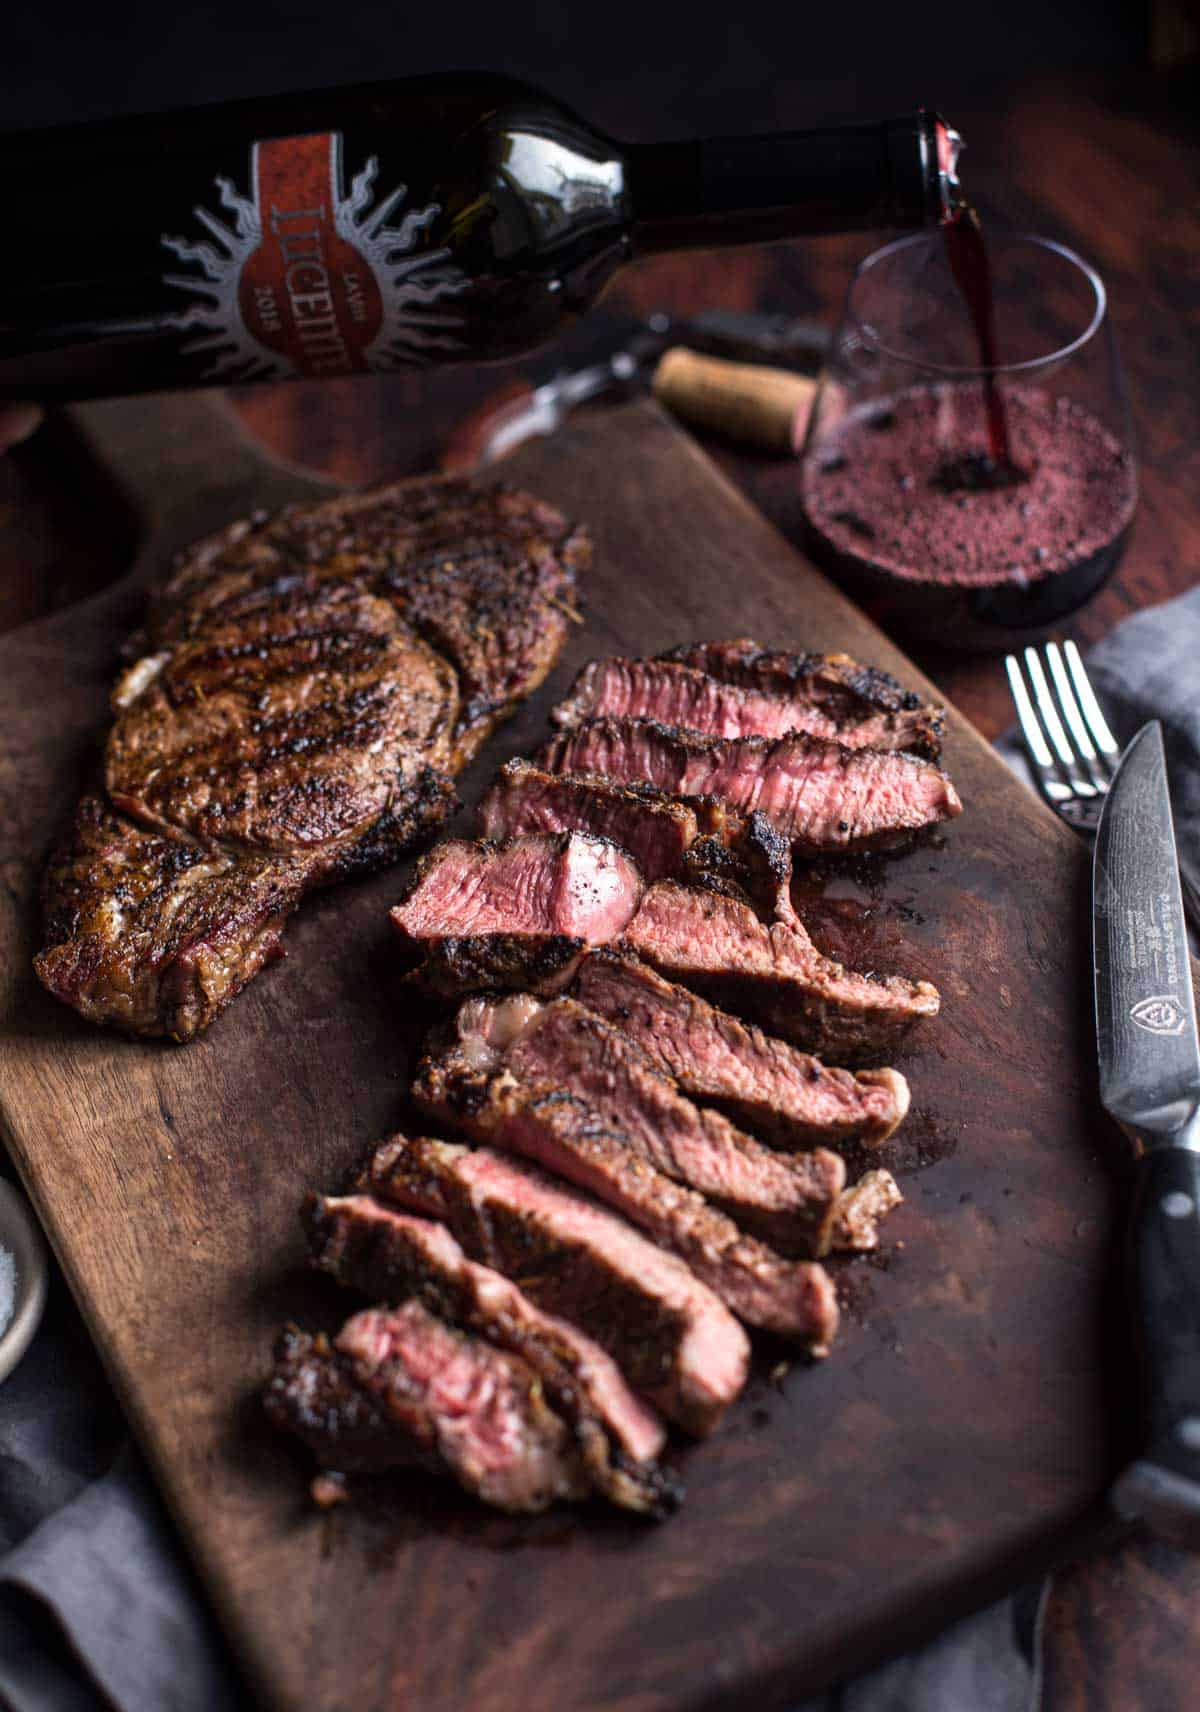 Ribeye steak sliced with a glass of red wine.